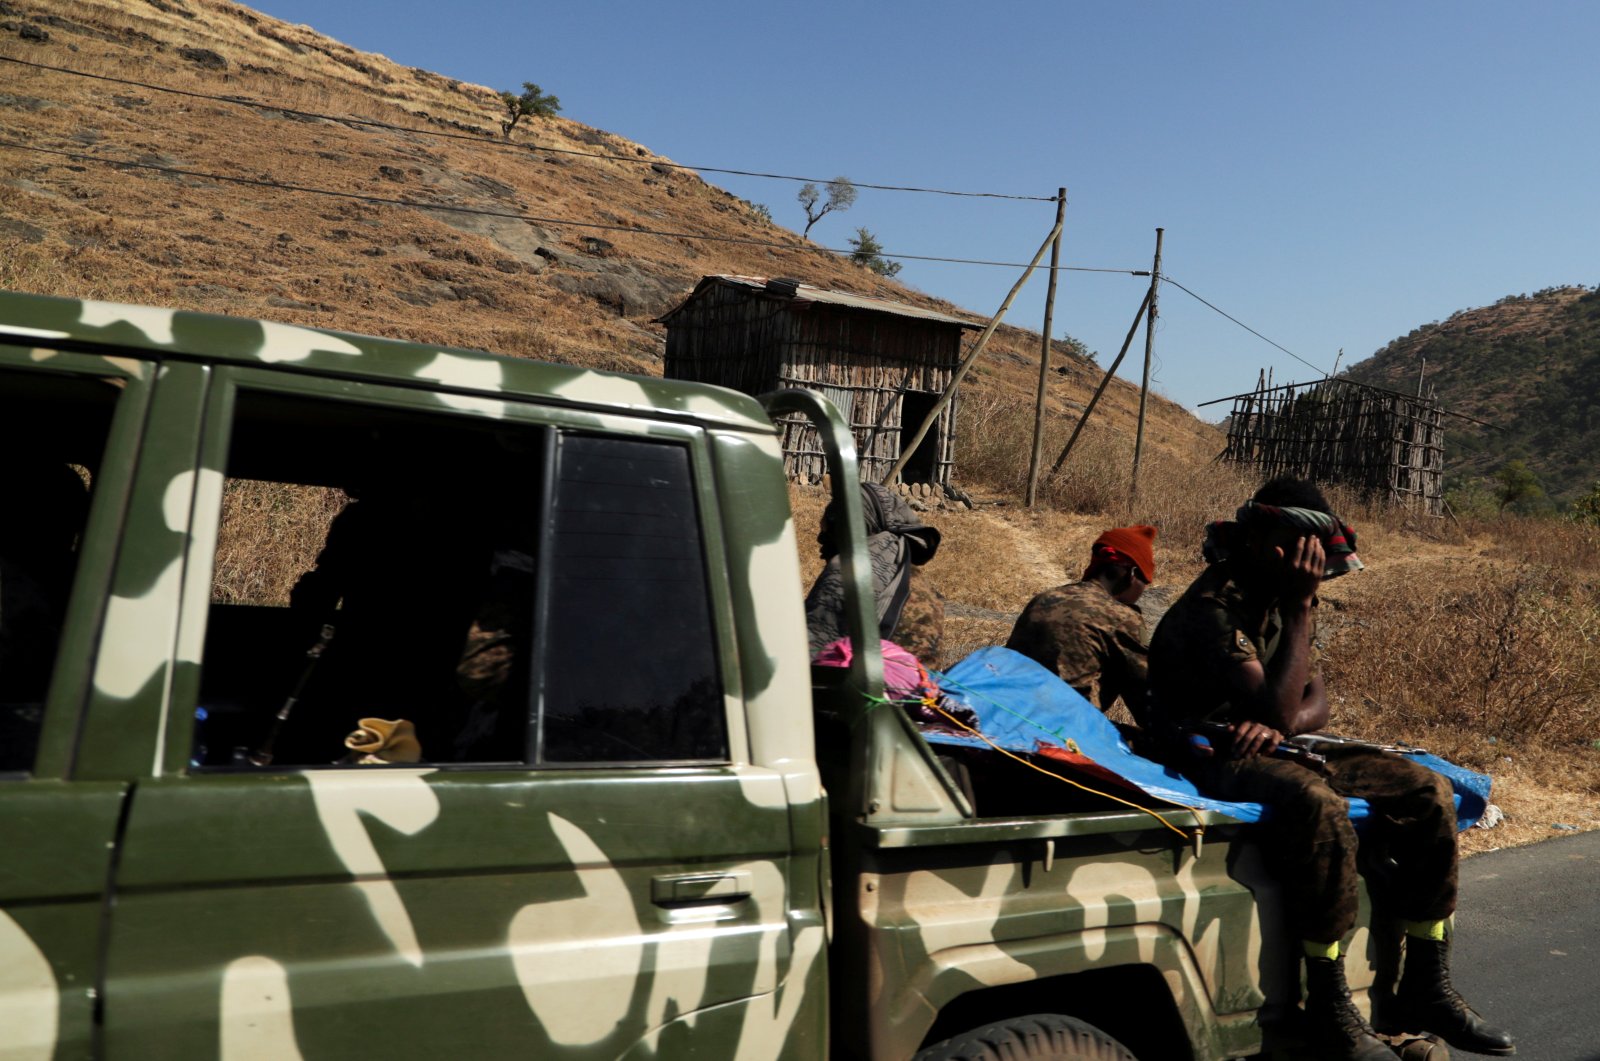 Members of the Ethiopian National Defense Force (ENDF) ride on their pickup truck as they head to a mission in the Sanja, Amhara region, near a border with Tigray, Ethiopia Nov. 9, 2020. (Reuters Photo)